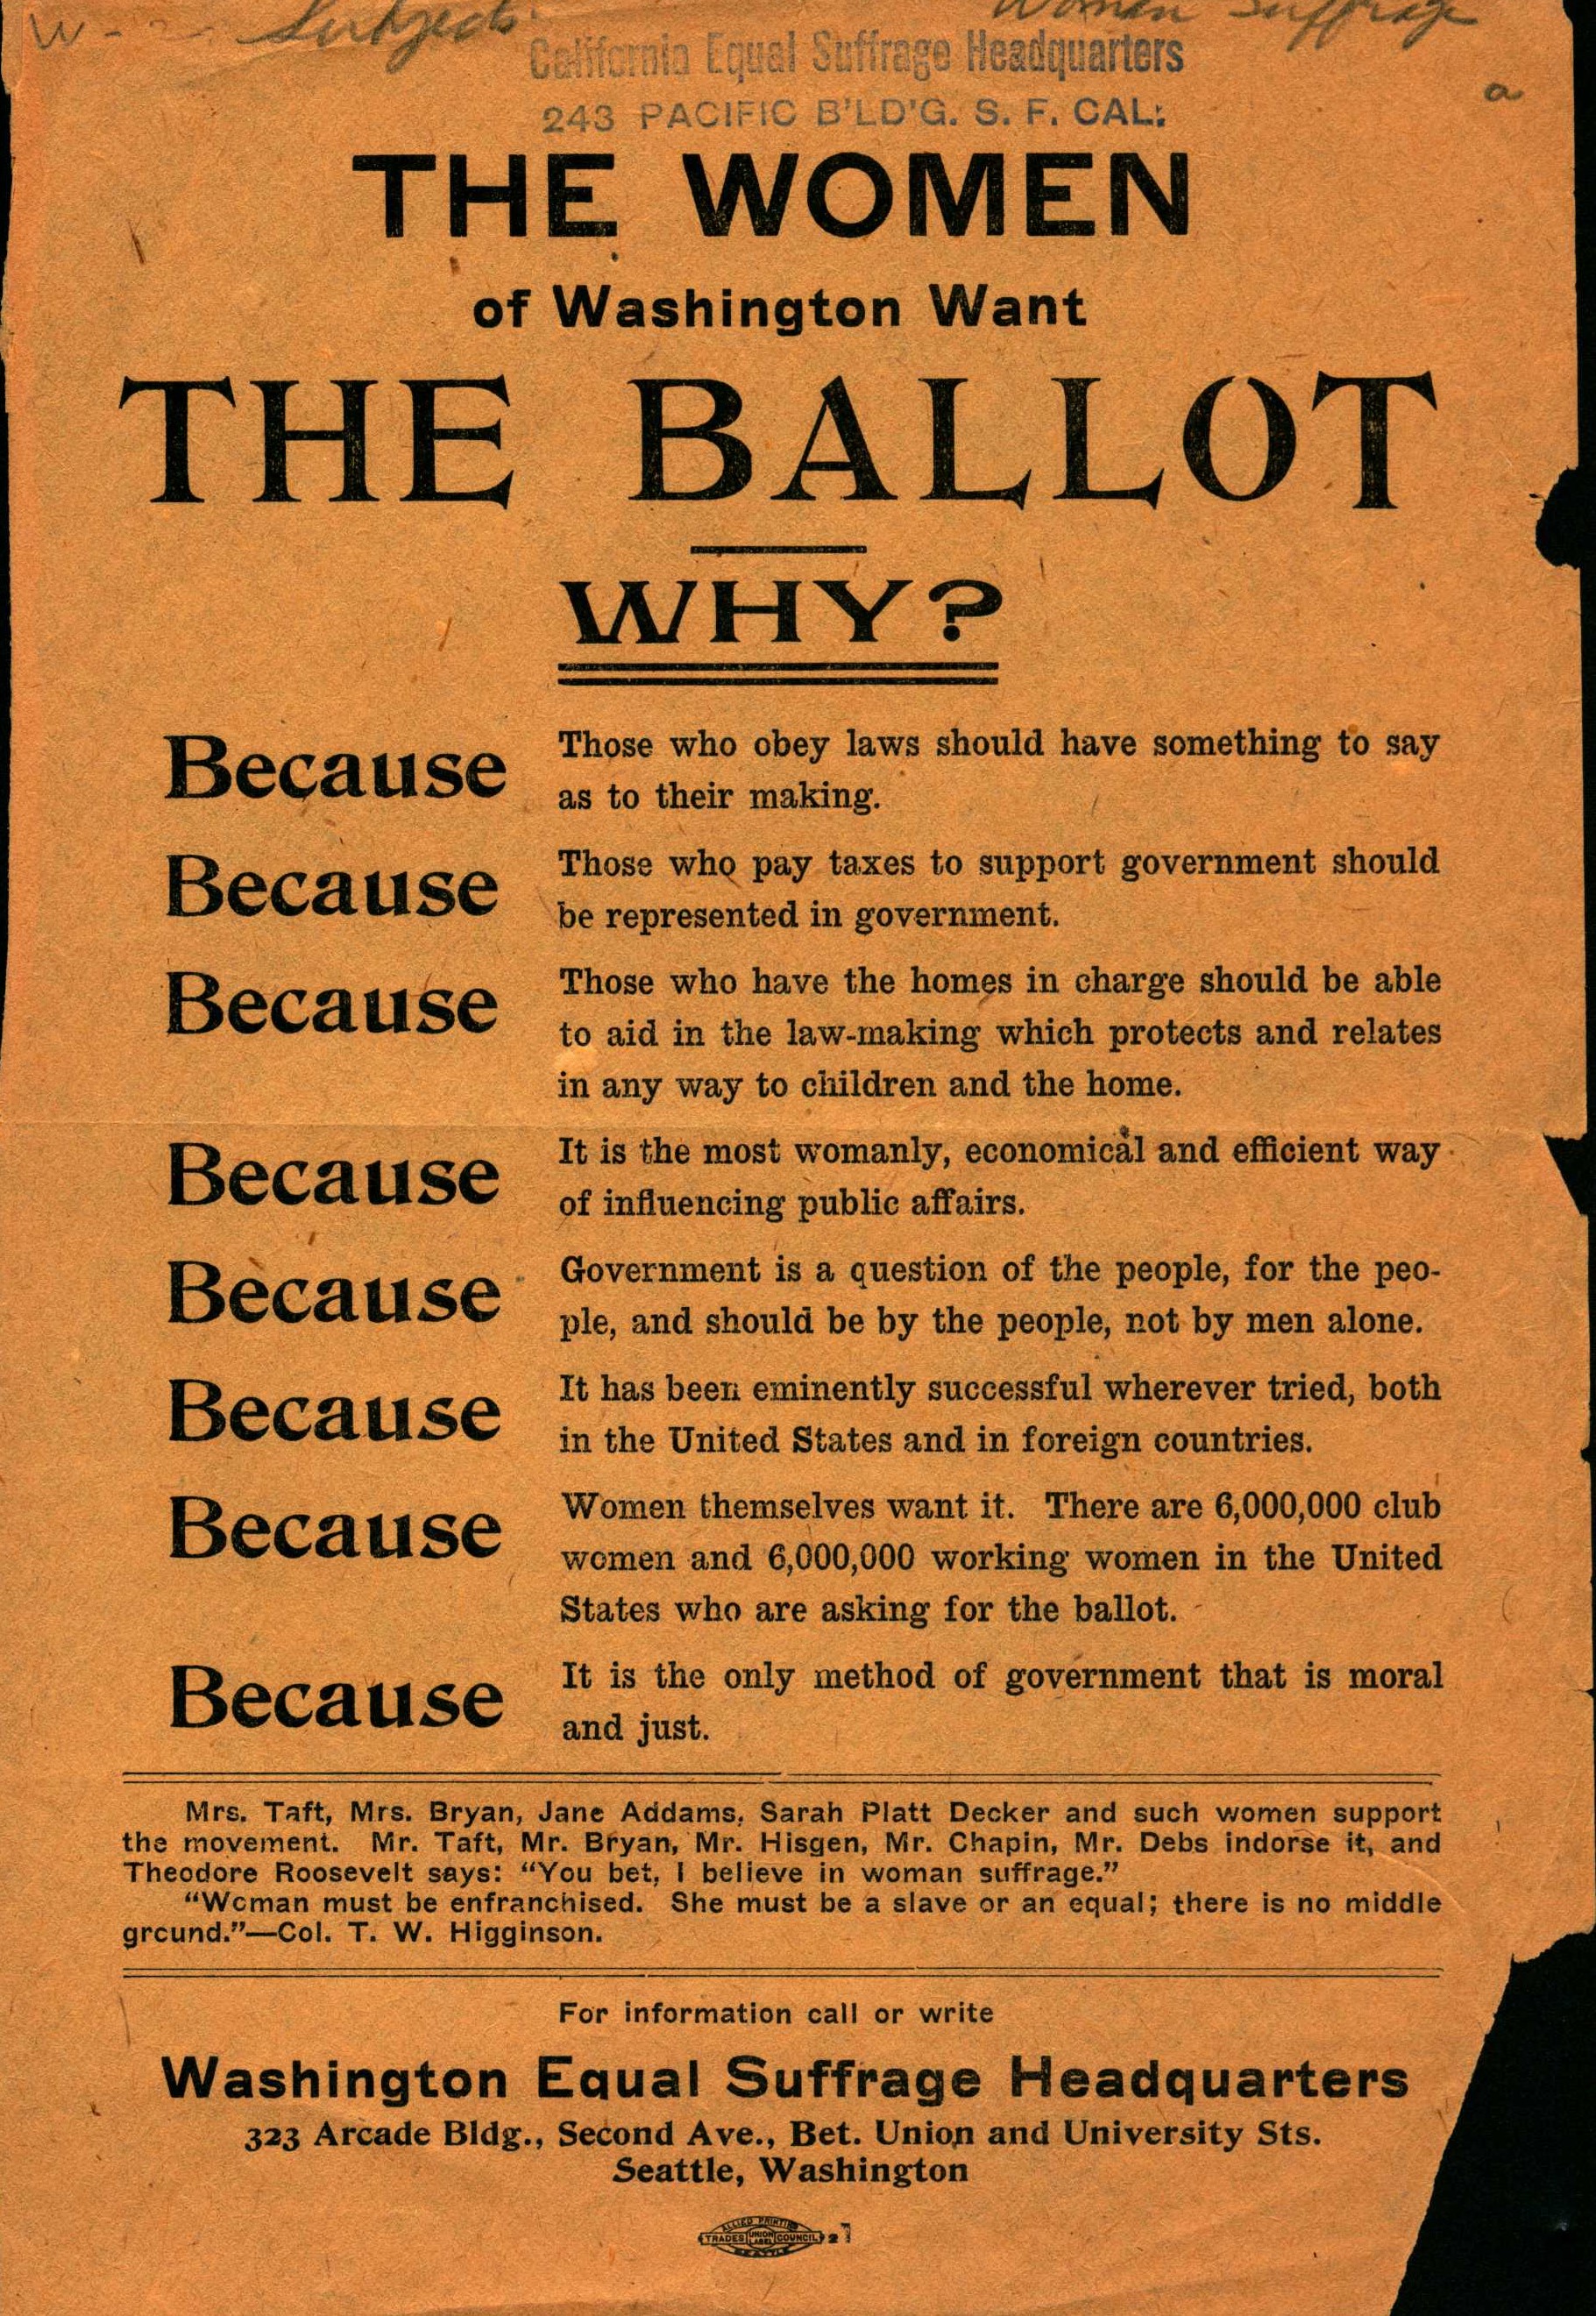 Shows the title information and 8 arguments for women's suffrage